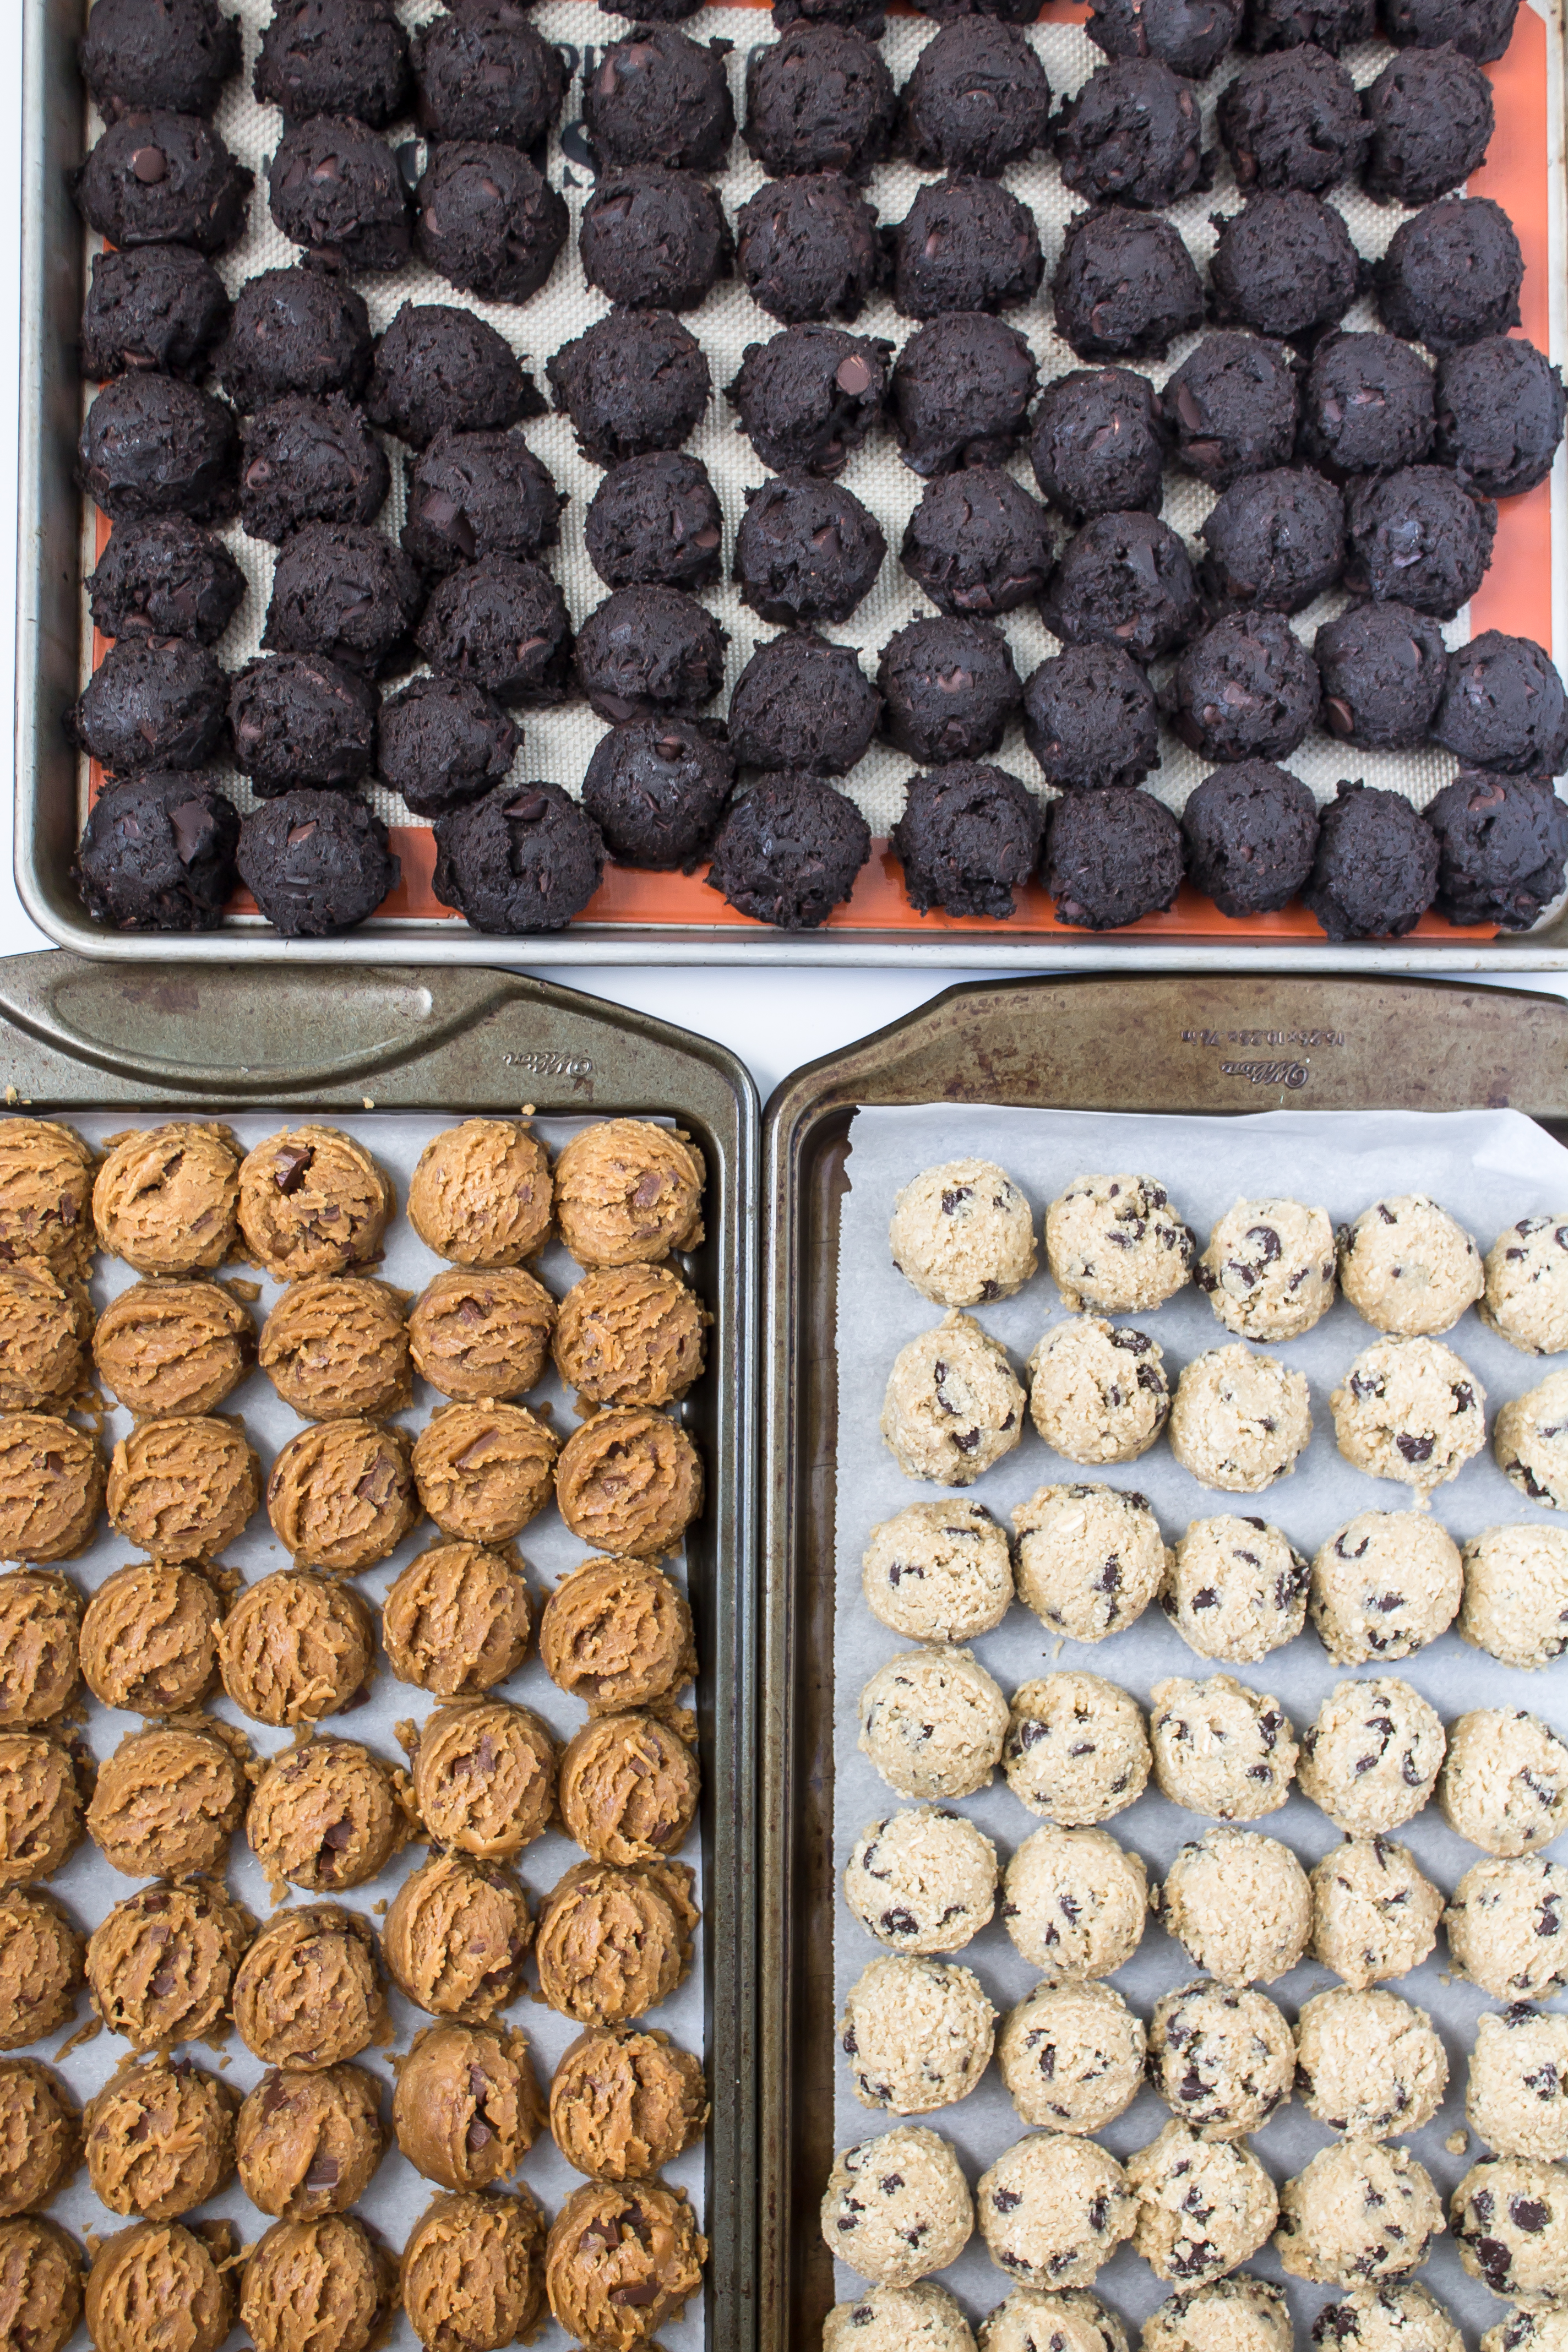 How to Make Hundreds of Cookies for a Wedding Reception Cookie Bar | www.passthecookies.com